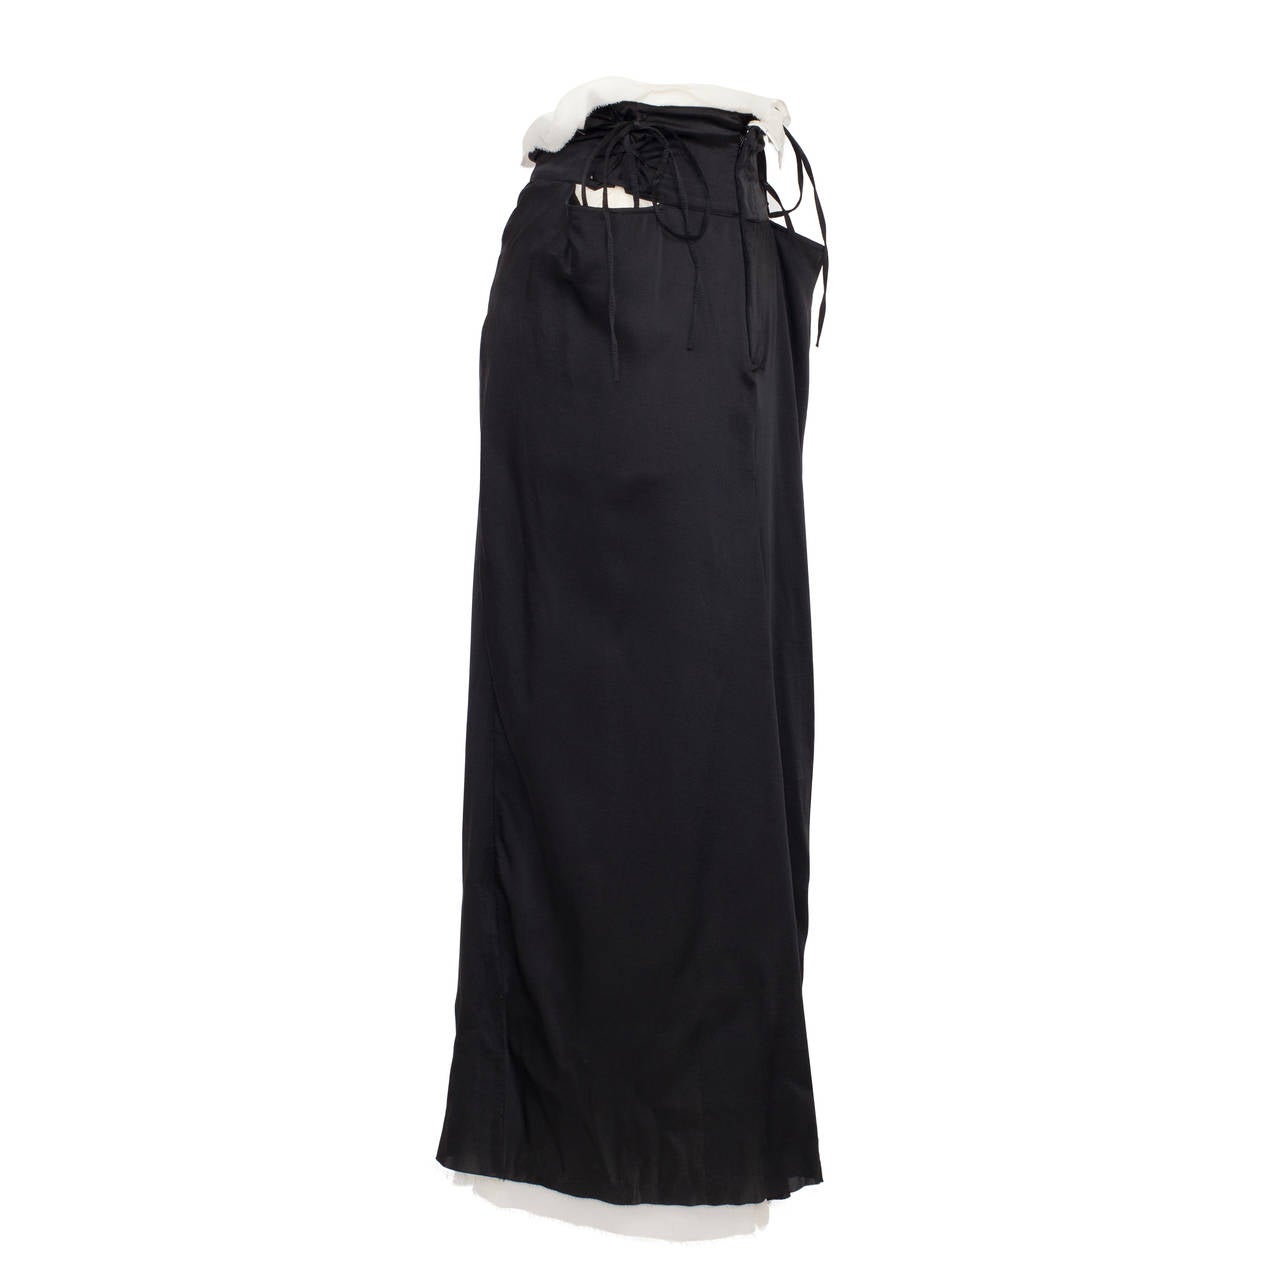 Yohji Yamamoto black / white double layered silk long skirt from circa 1990's with adjustable Lace up details. Unworn.
Original size - 2 ( Fits like M)
Measurements : 
Waist - About 64 cm (Adjustable with laces on sides)
Width - 65 cm
Length - 100 cm